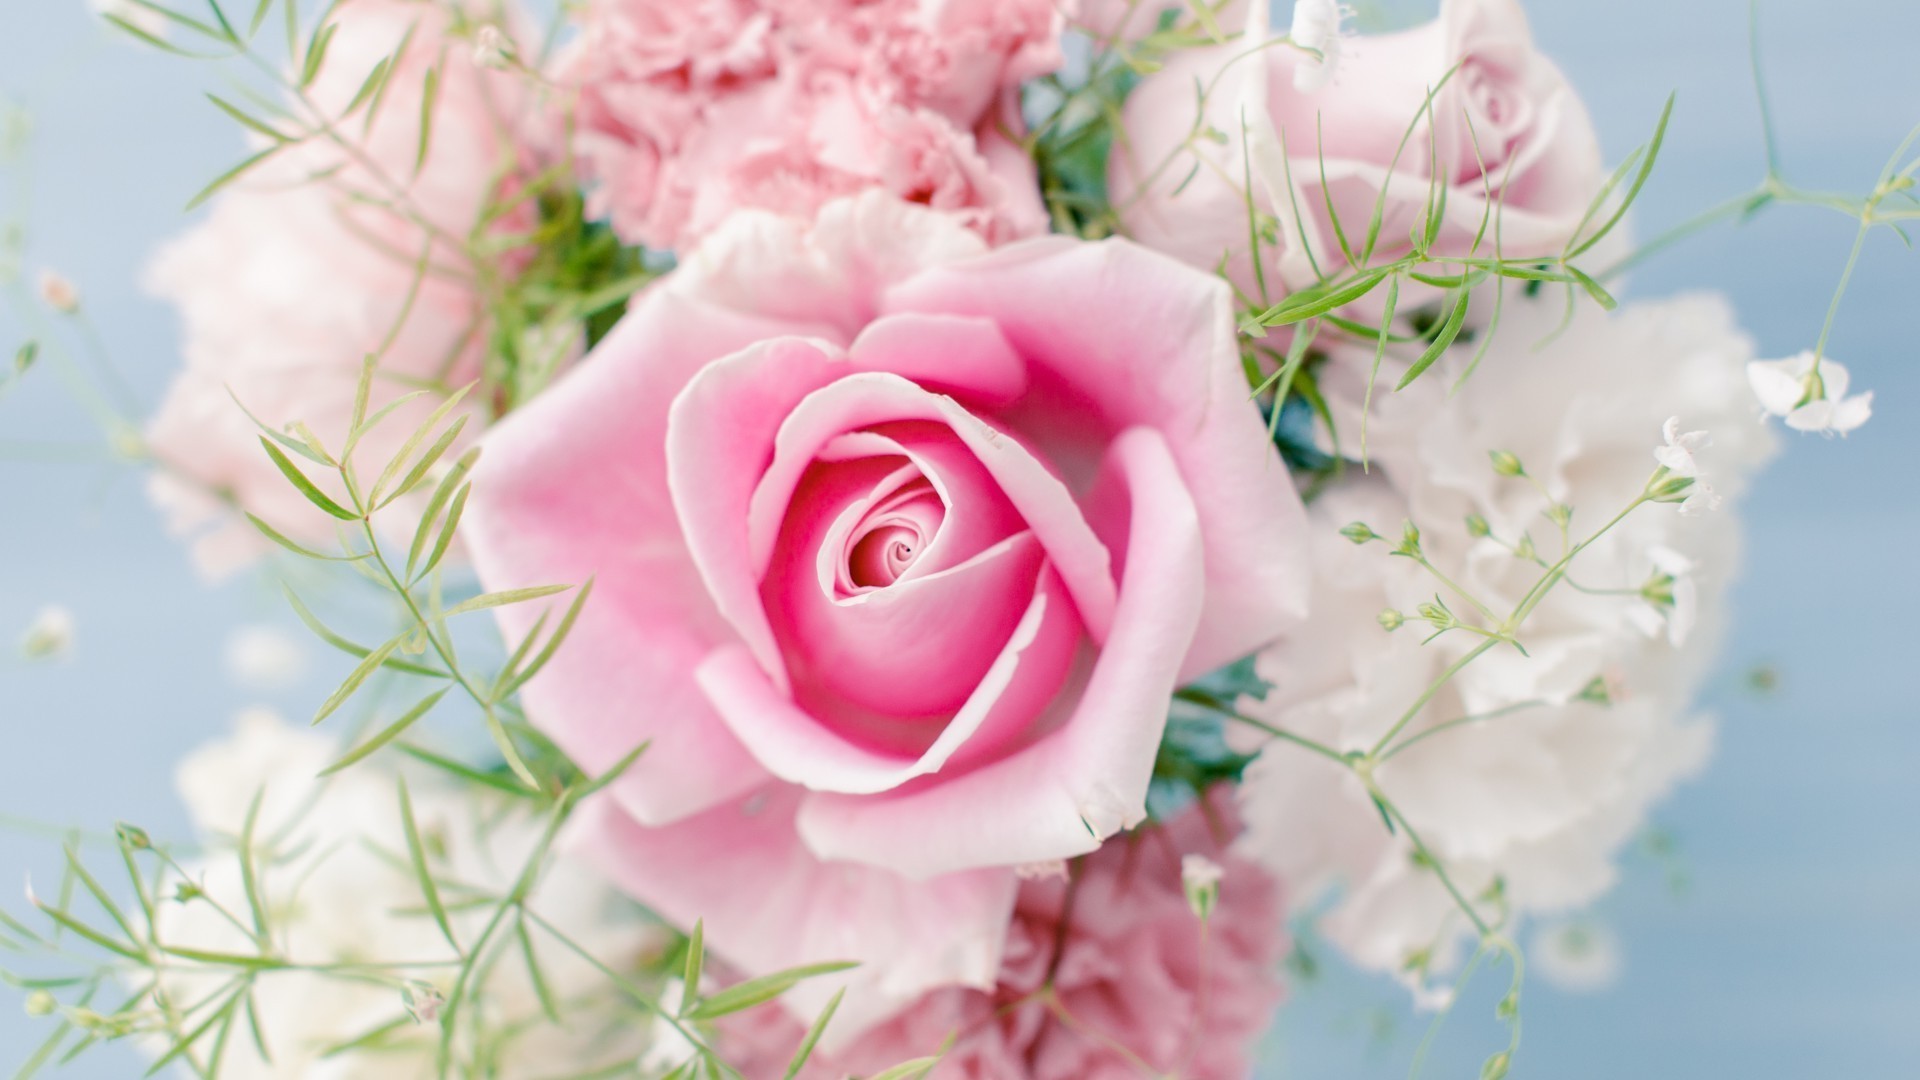 Women's Day Roses image free download